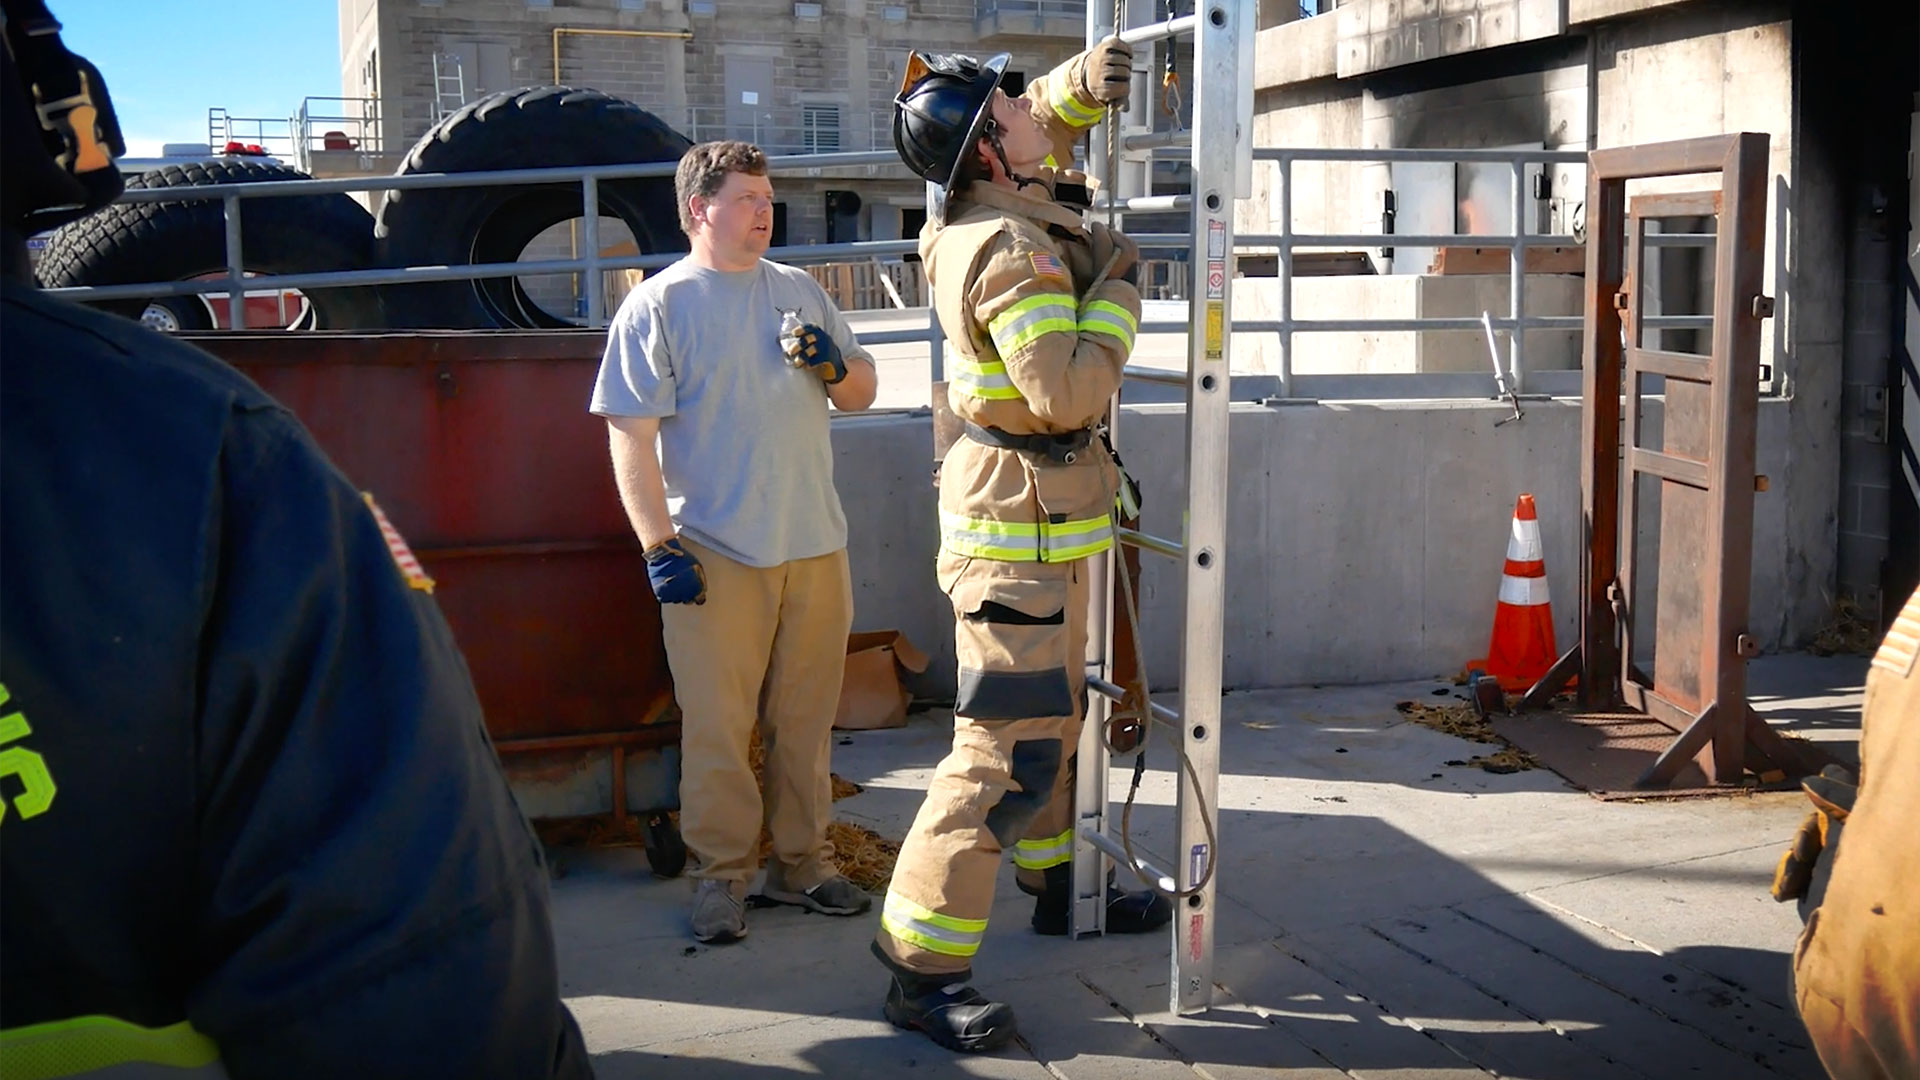 Featured image for “Firefighter Ground Ladder Training | One Man Deployment”